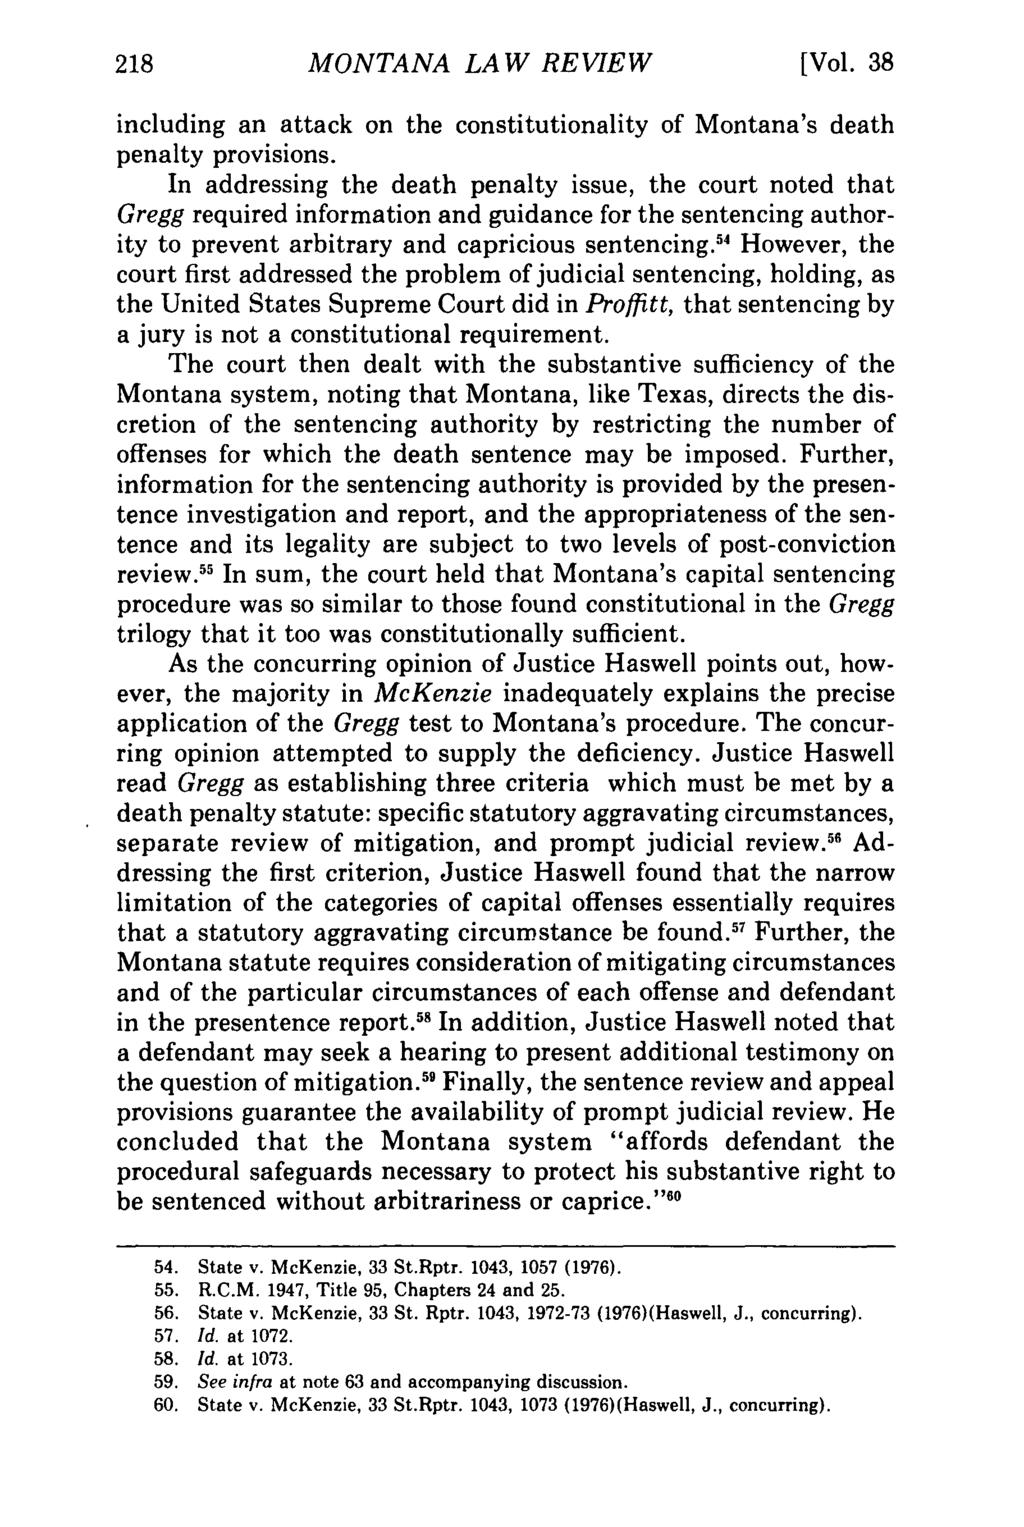 MONTANA Montana Law Review, LAW Vol. 38 REVIEW [1977], Iss. 1, Art. 7 [Vol. 38 including an attack on the constitutionality of Montana's death penalty provisions.